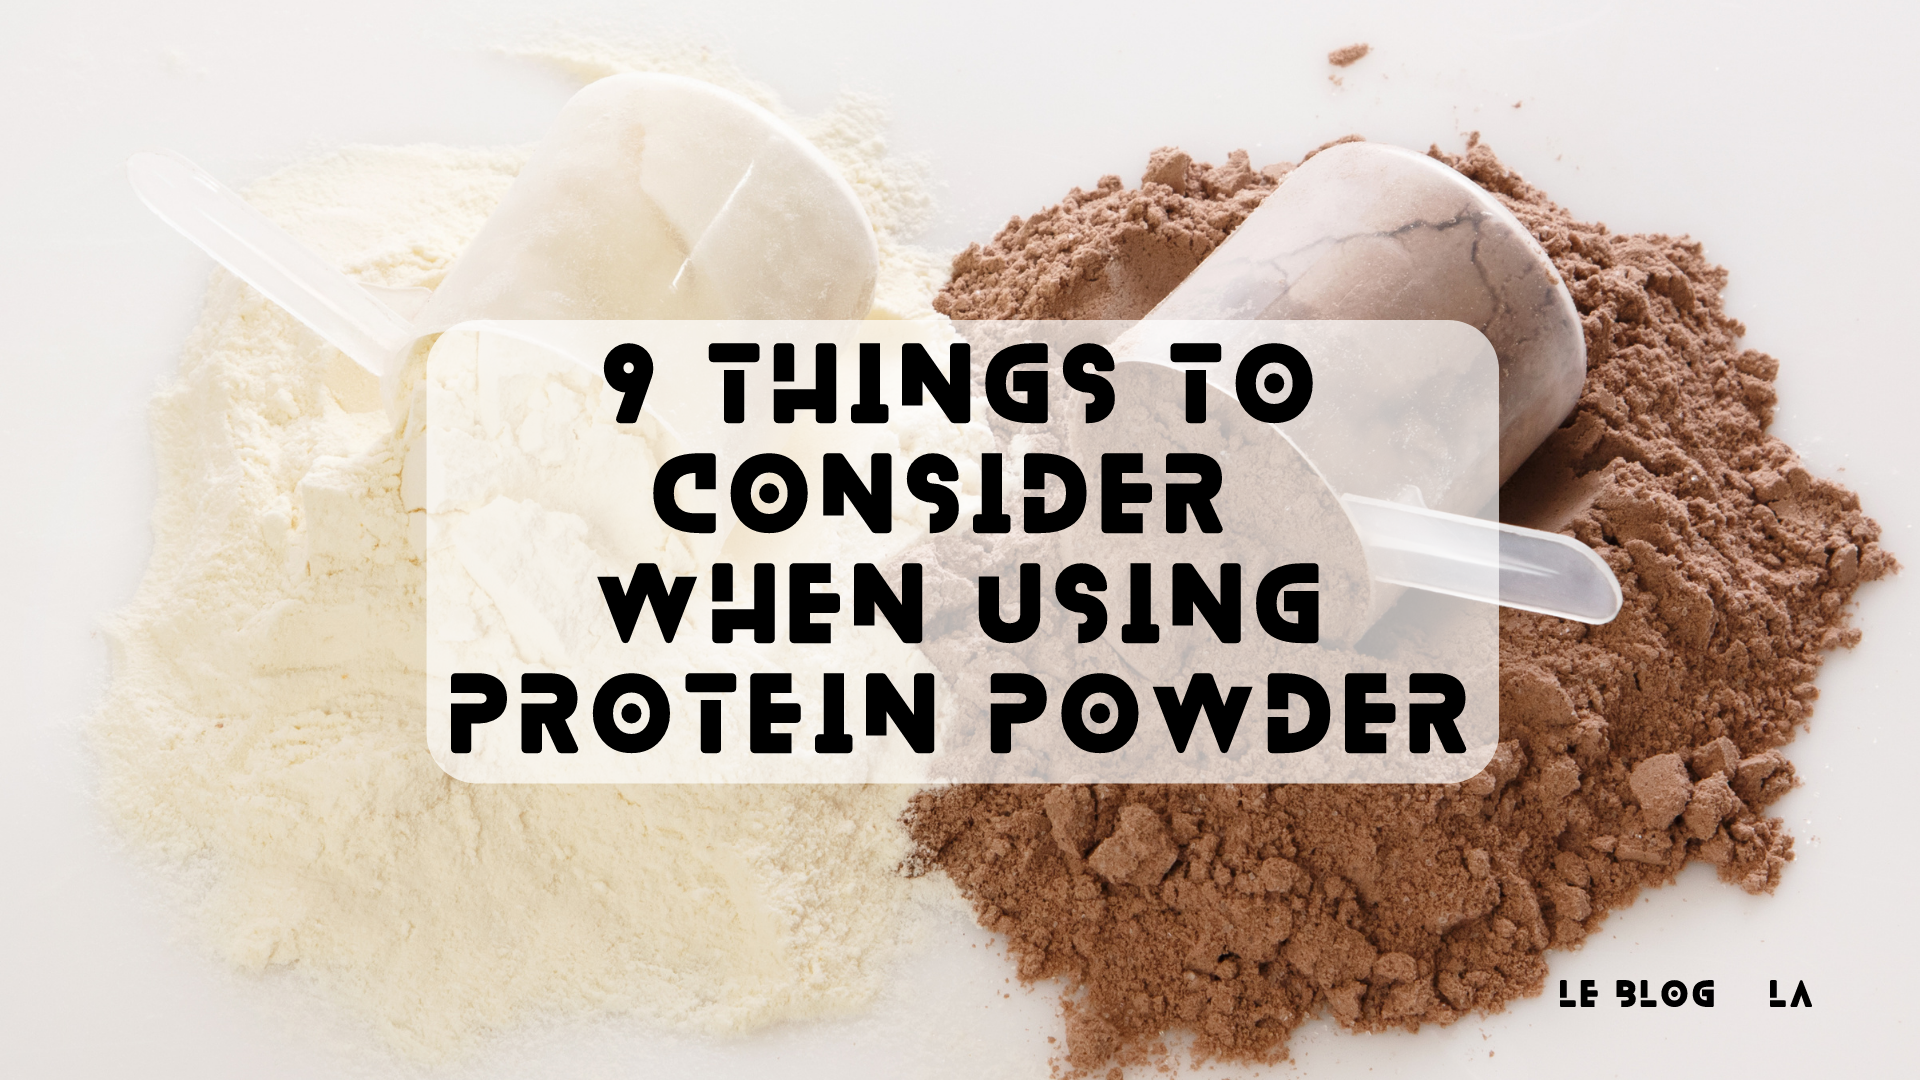 9 Things To Consider When Using Protein Powder